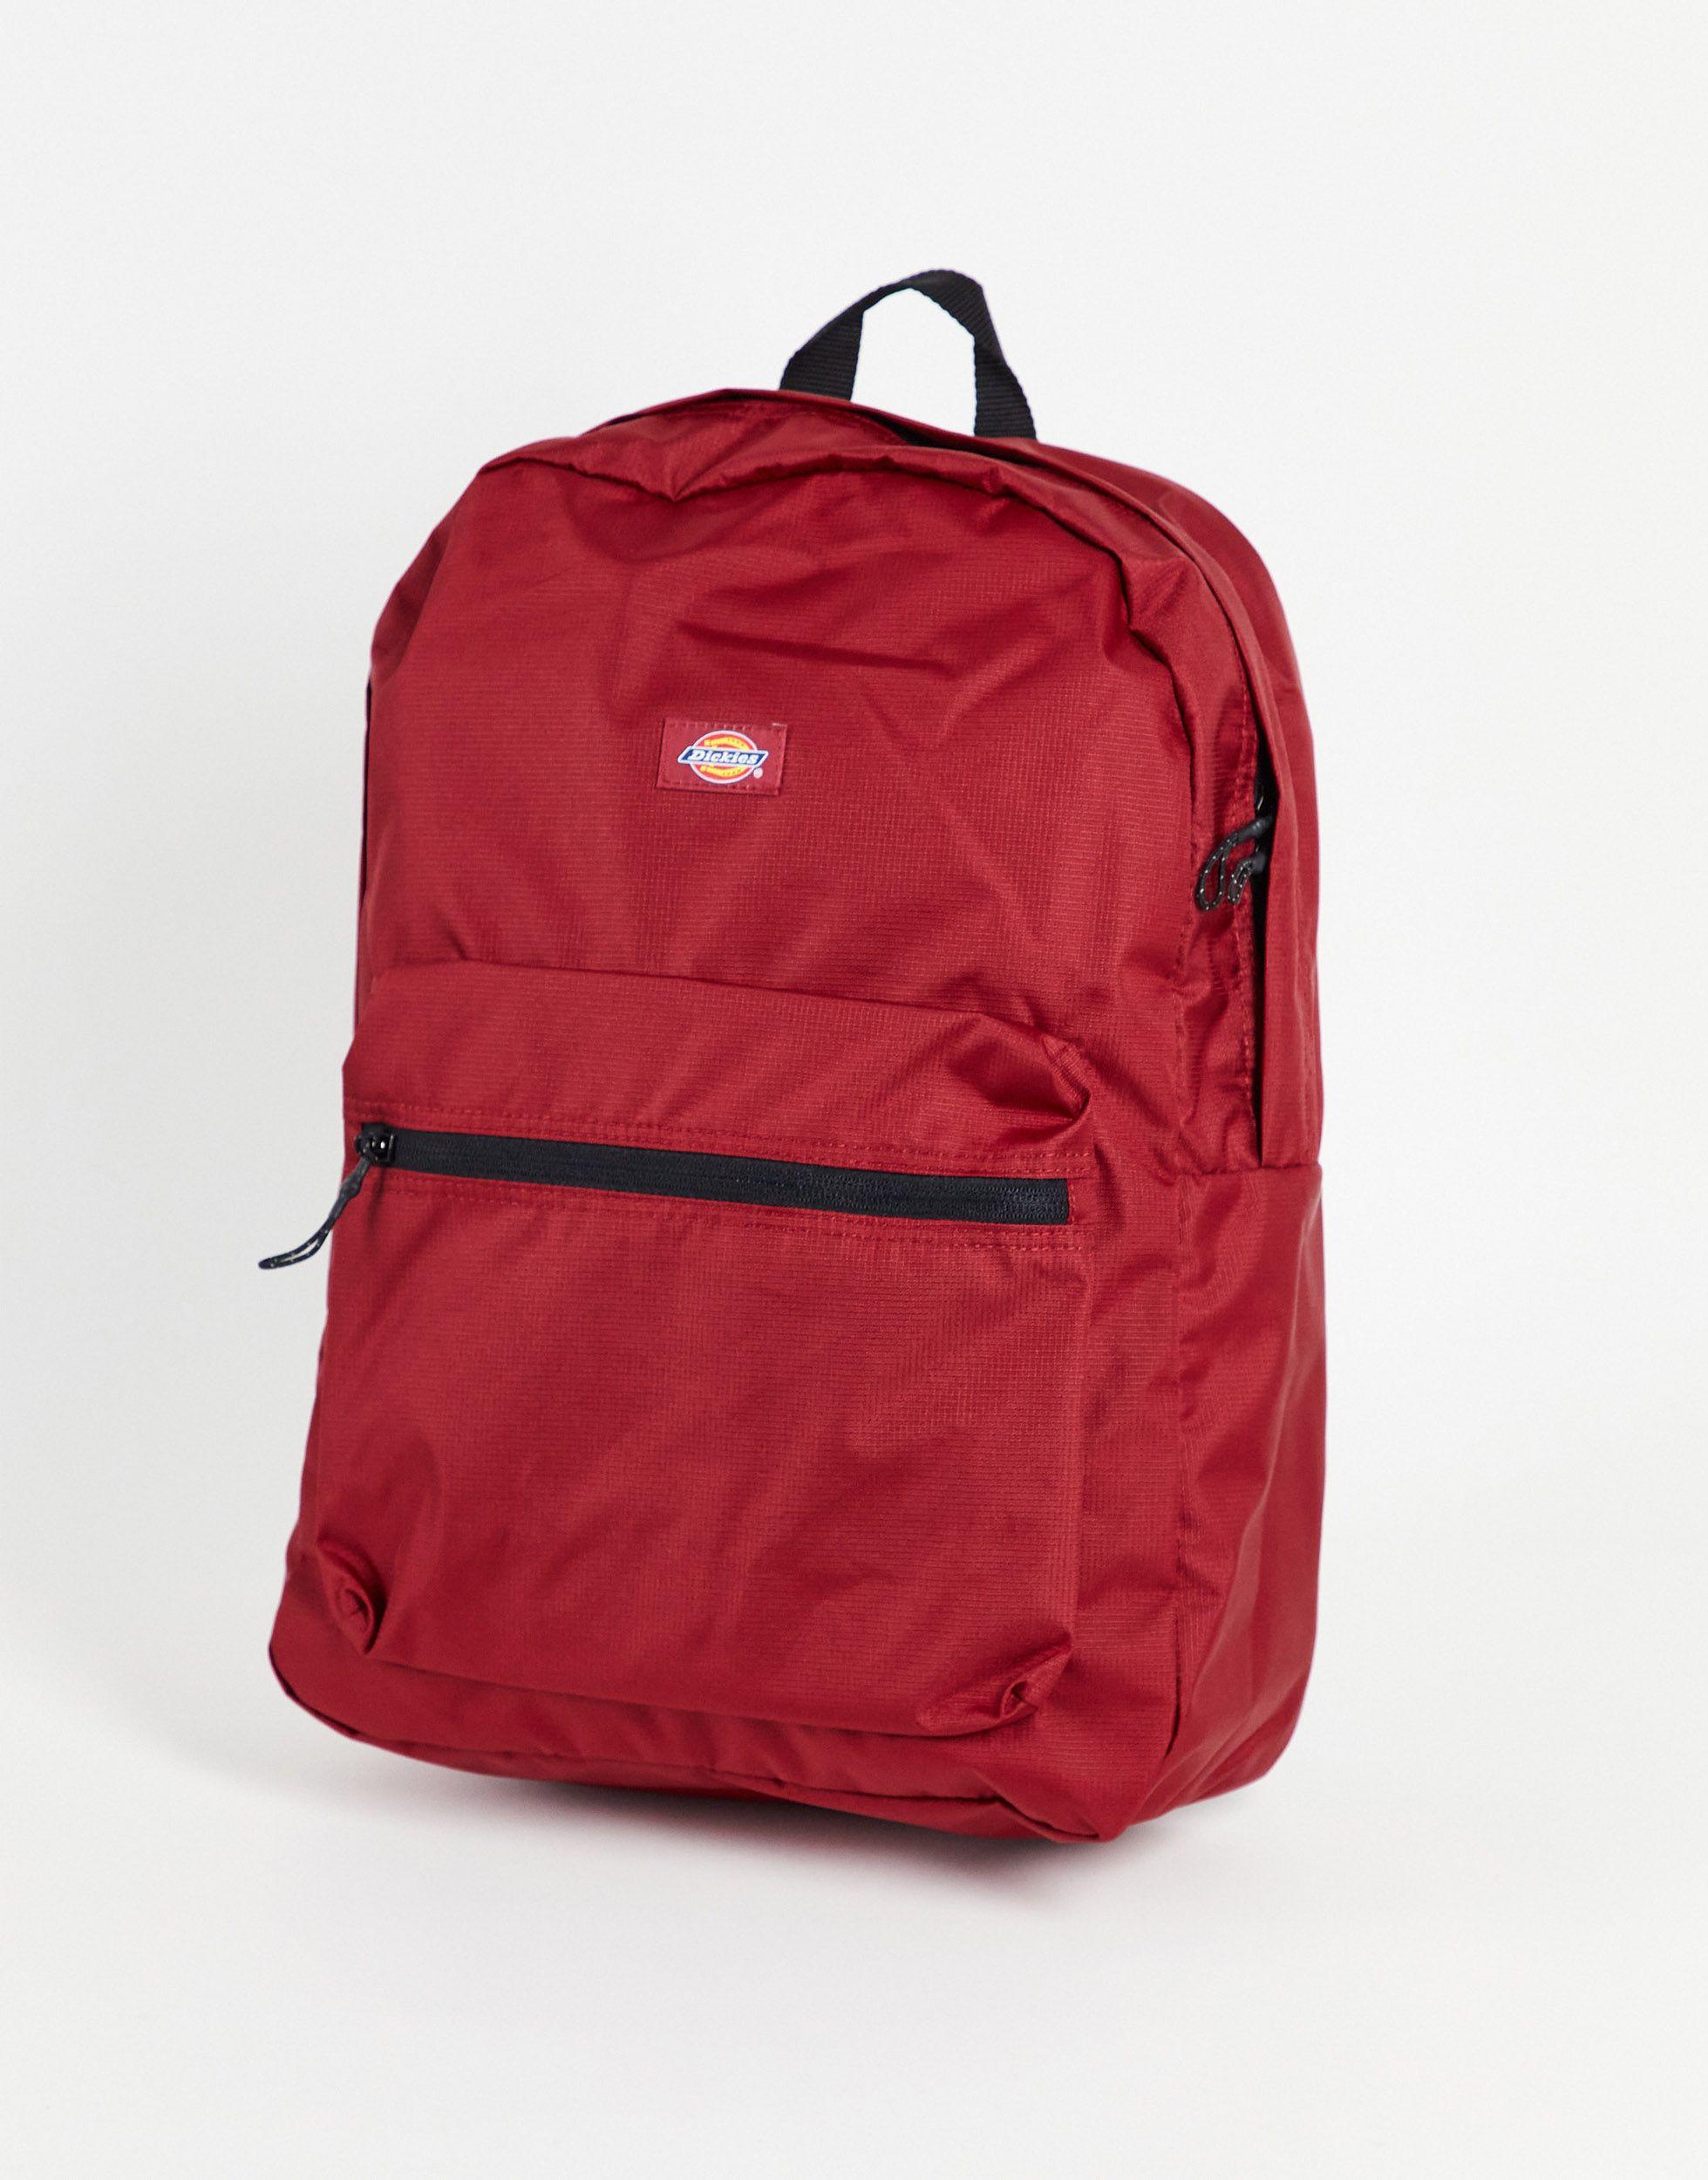 Dickies Chickaloon Backpack in Red for Men - Lyst